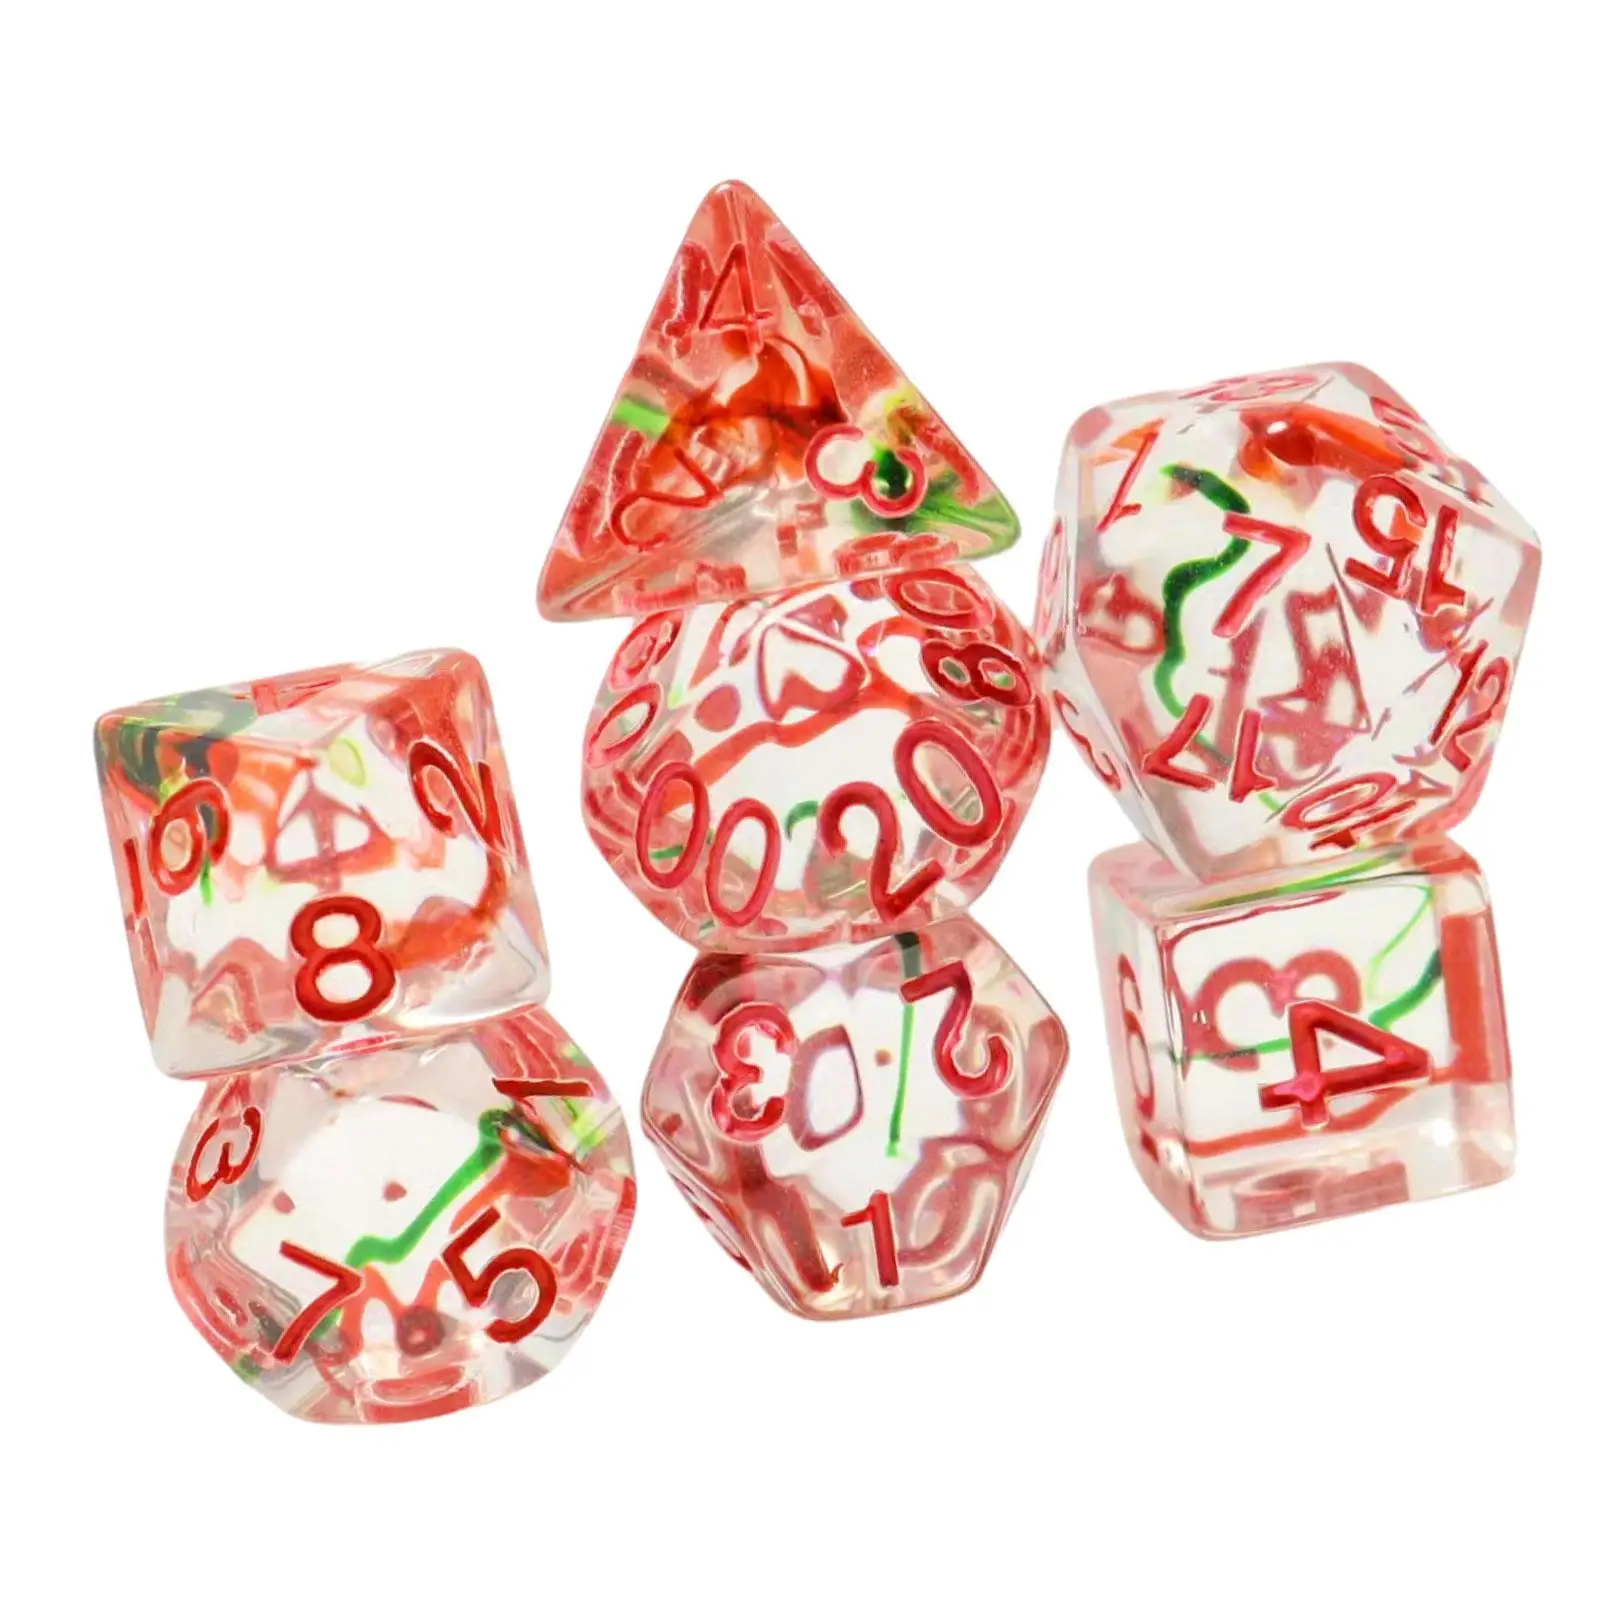 7x Polyhedral Dices Game, Dices Set, D20 D12 D10 D8 D6 D4 Party Game Dices, Multi Sided Game Dices for Card Game